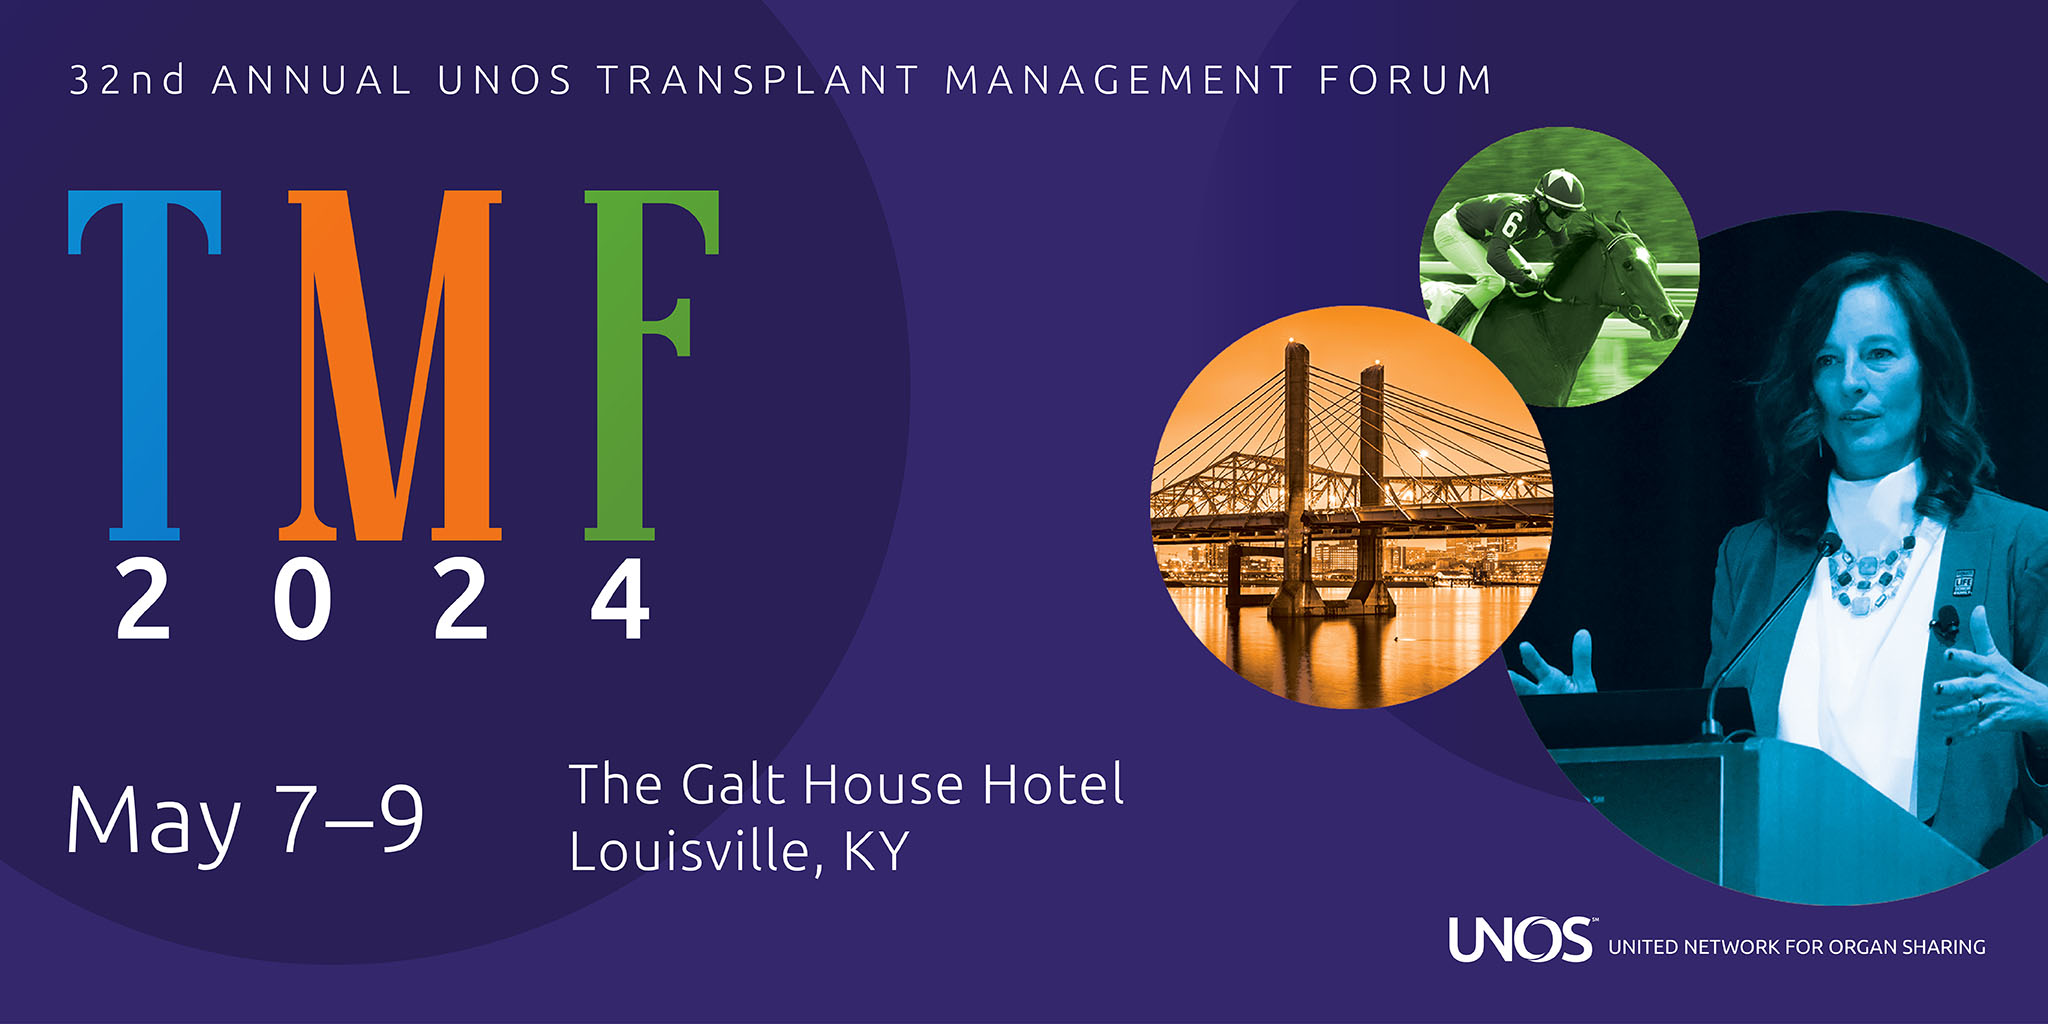 Transplant Management Forum abstracts UNOS